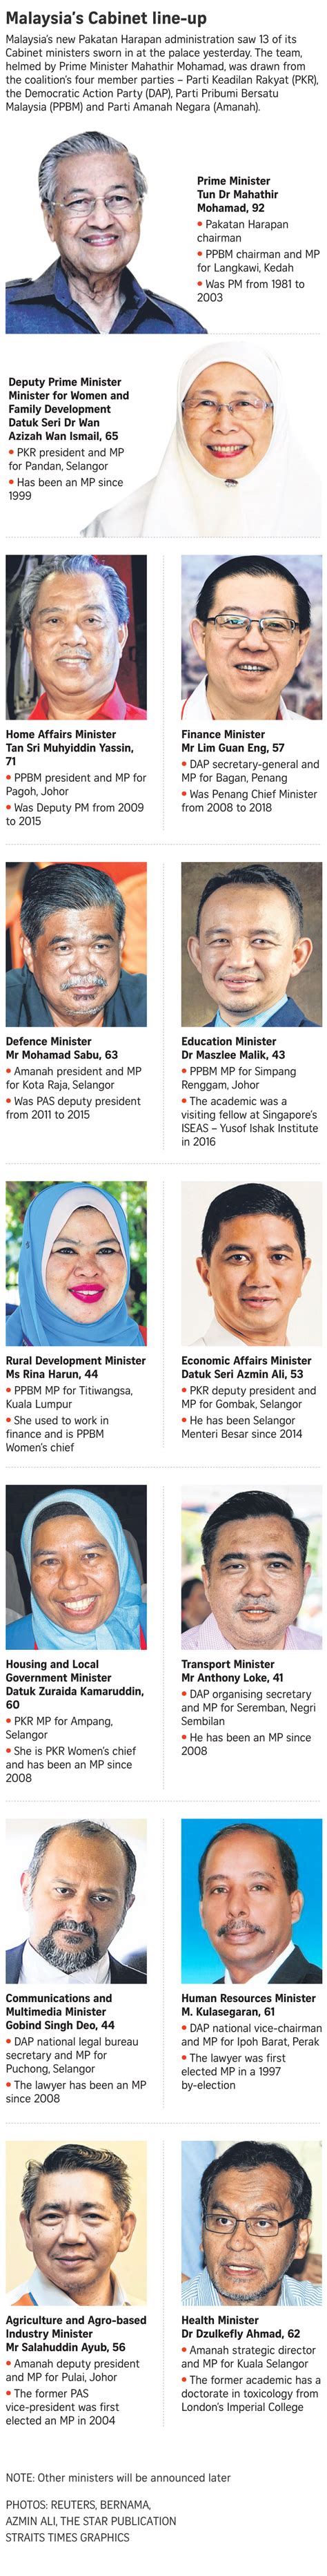 Malaysia's new prime minister has been sworn in — but some say the political crisis is 'far from over'. Malaysia prime minister Mahathir Mohamad's new Cabinet ...